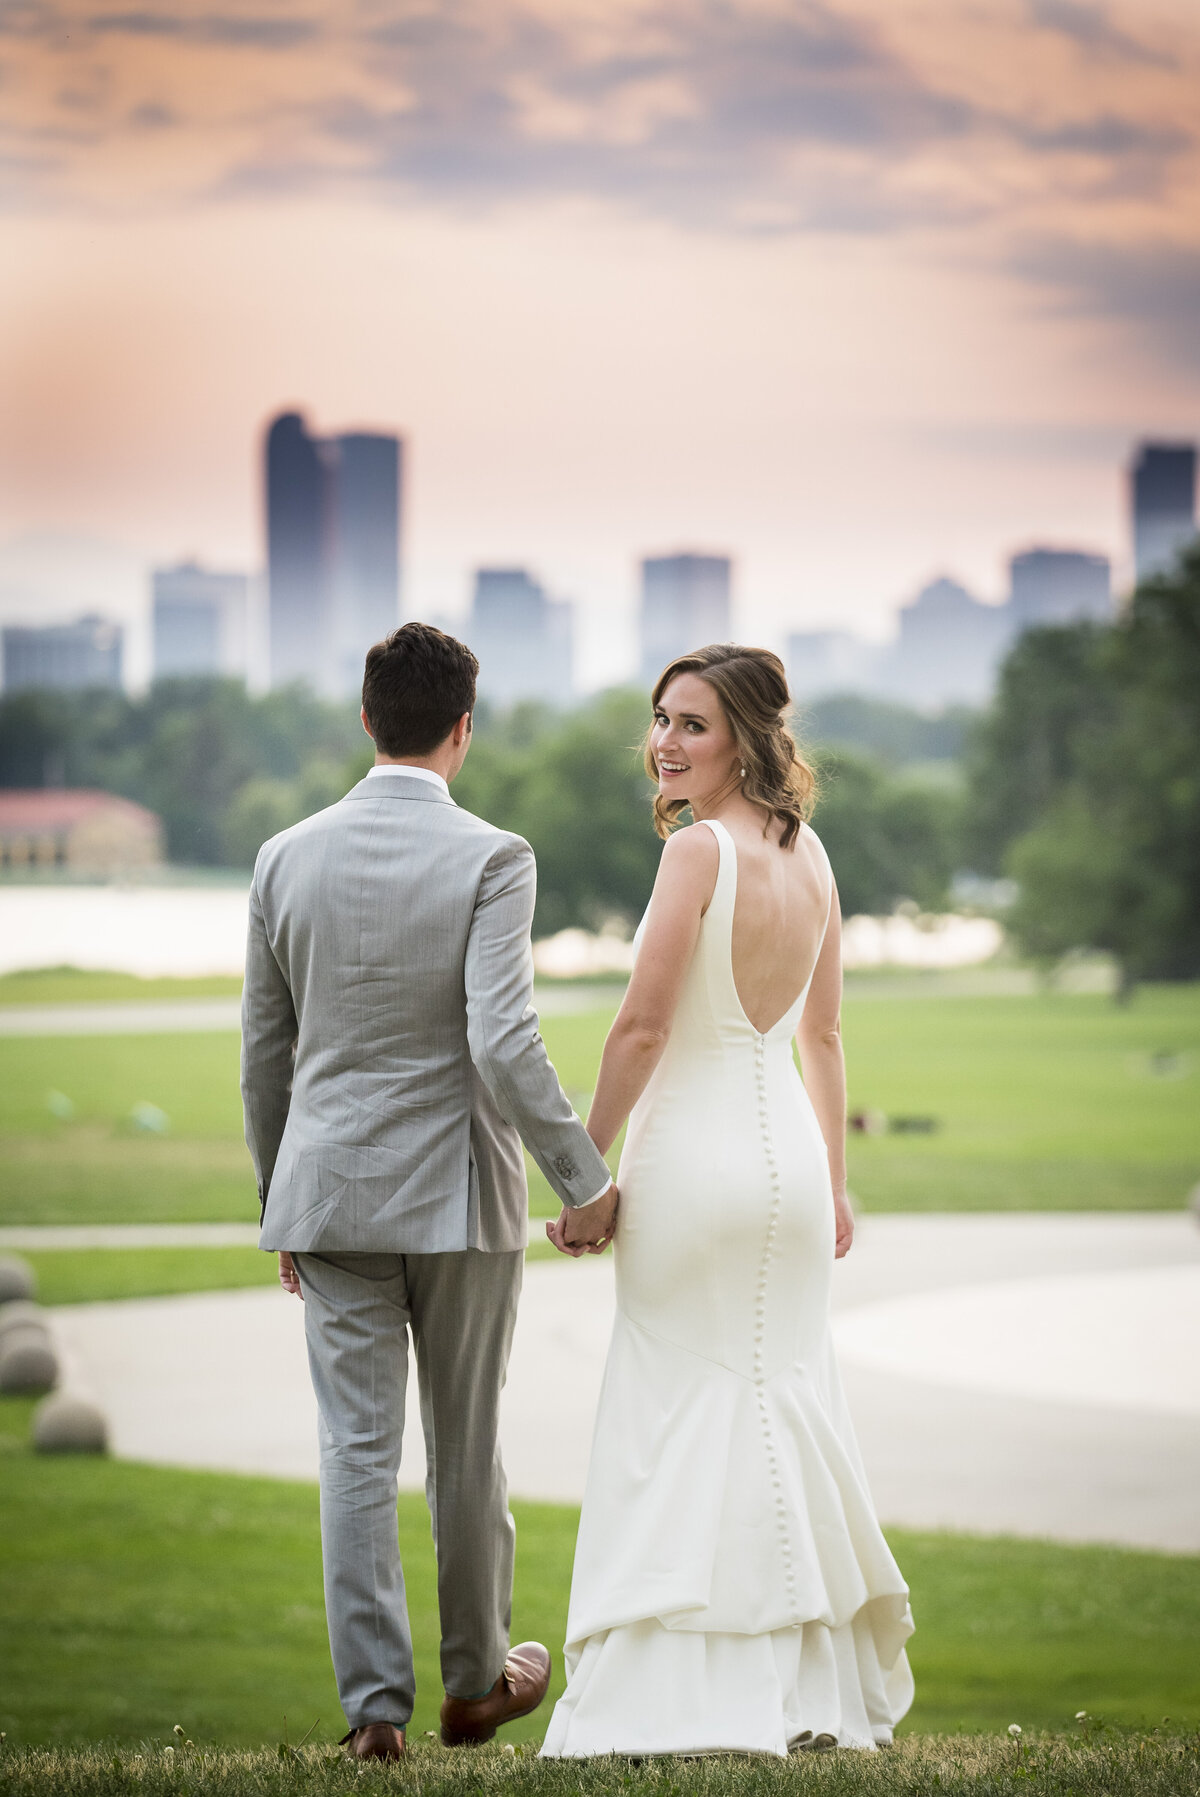 A bride and groom face away from the camera as the bride looks over her shoulder to smile with the Denver skyline in the background.